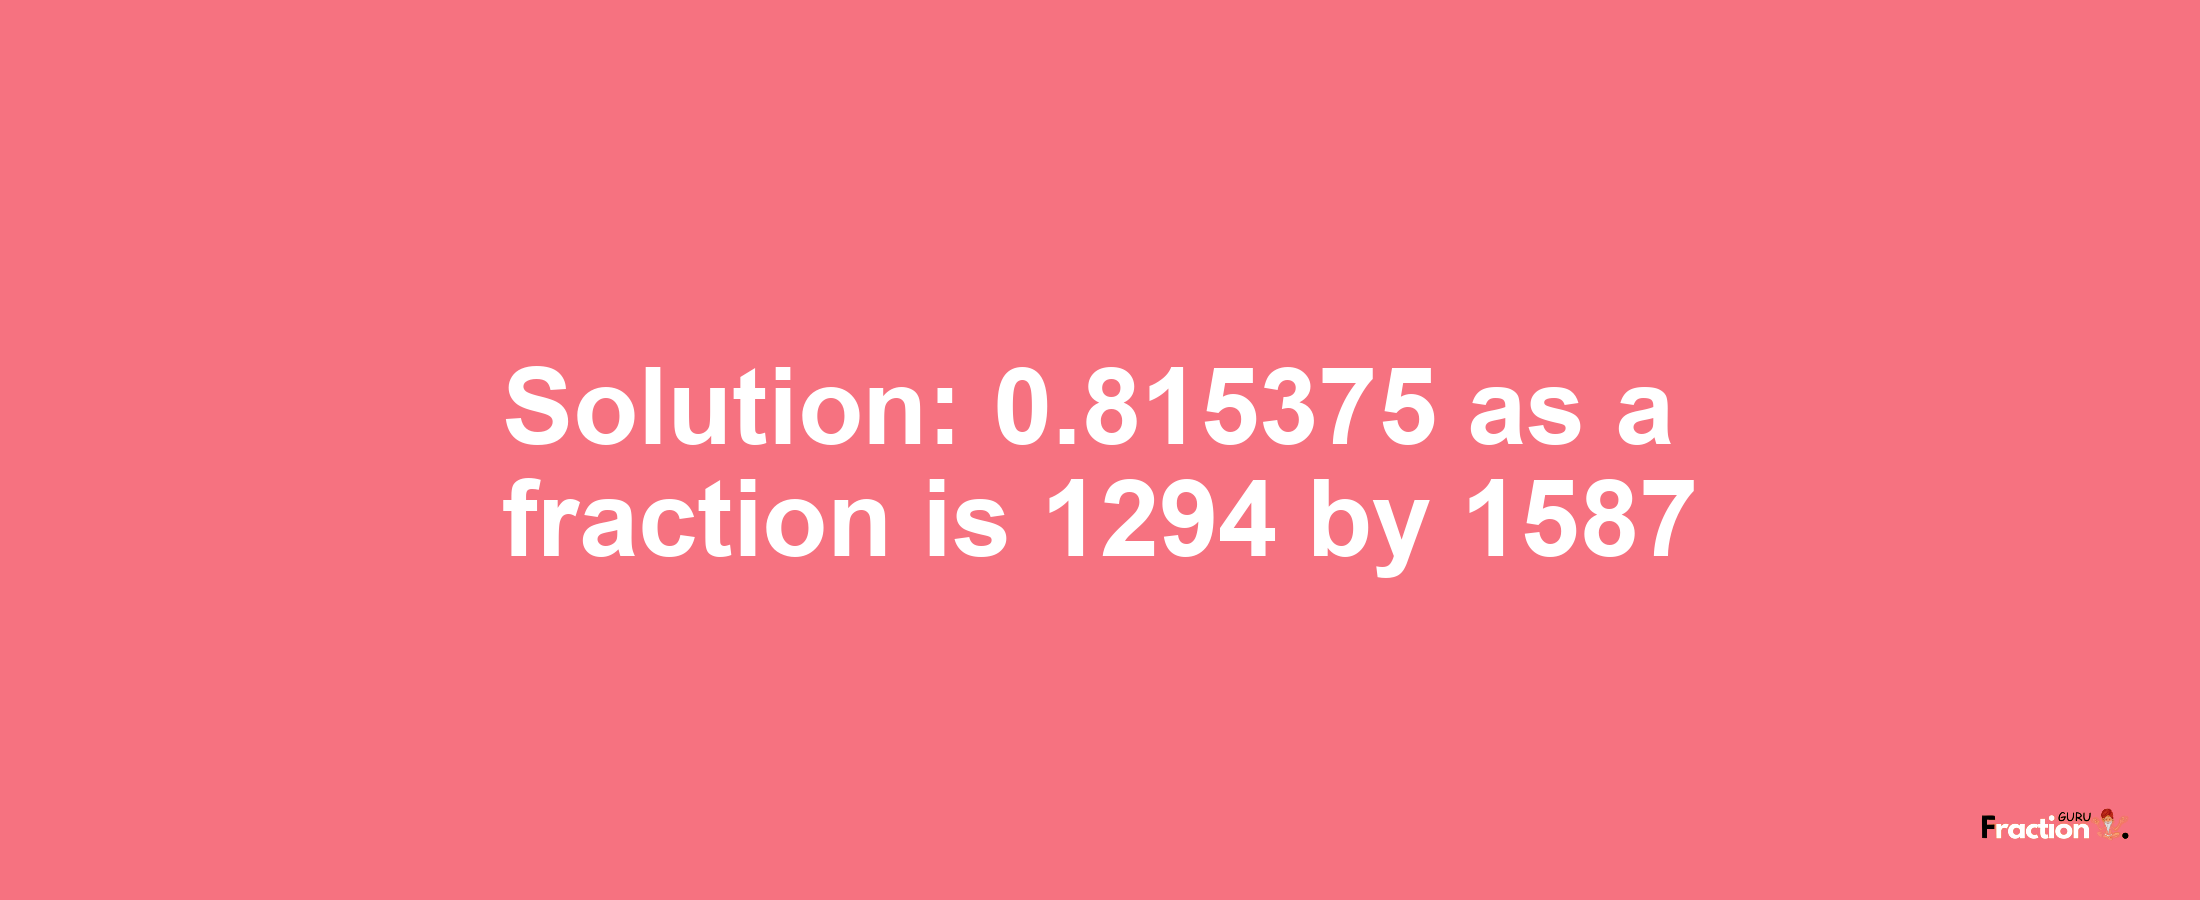 Solution:0.815375 as a fraction is 1294/1587